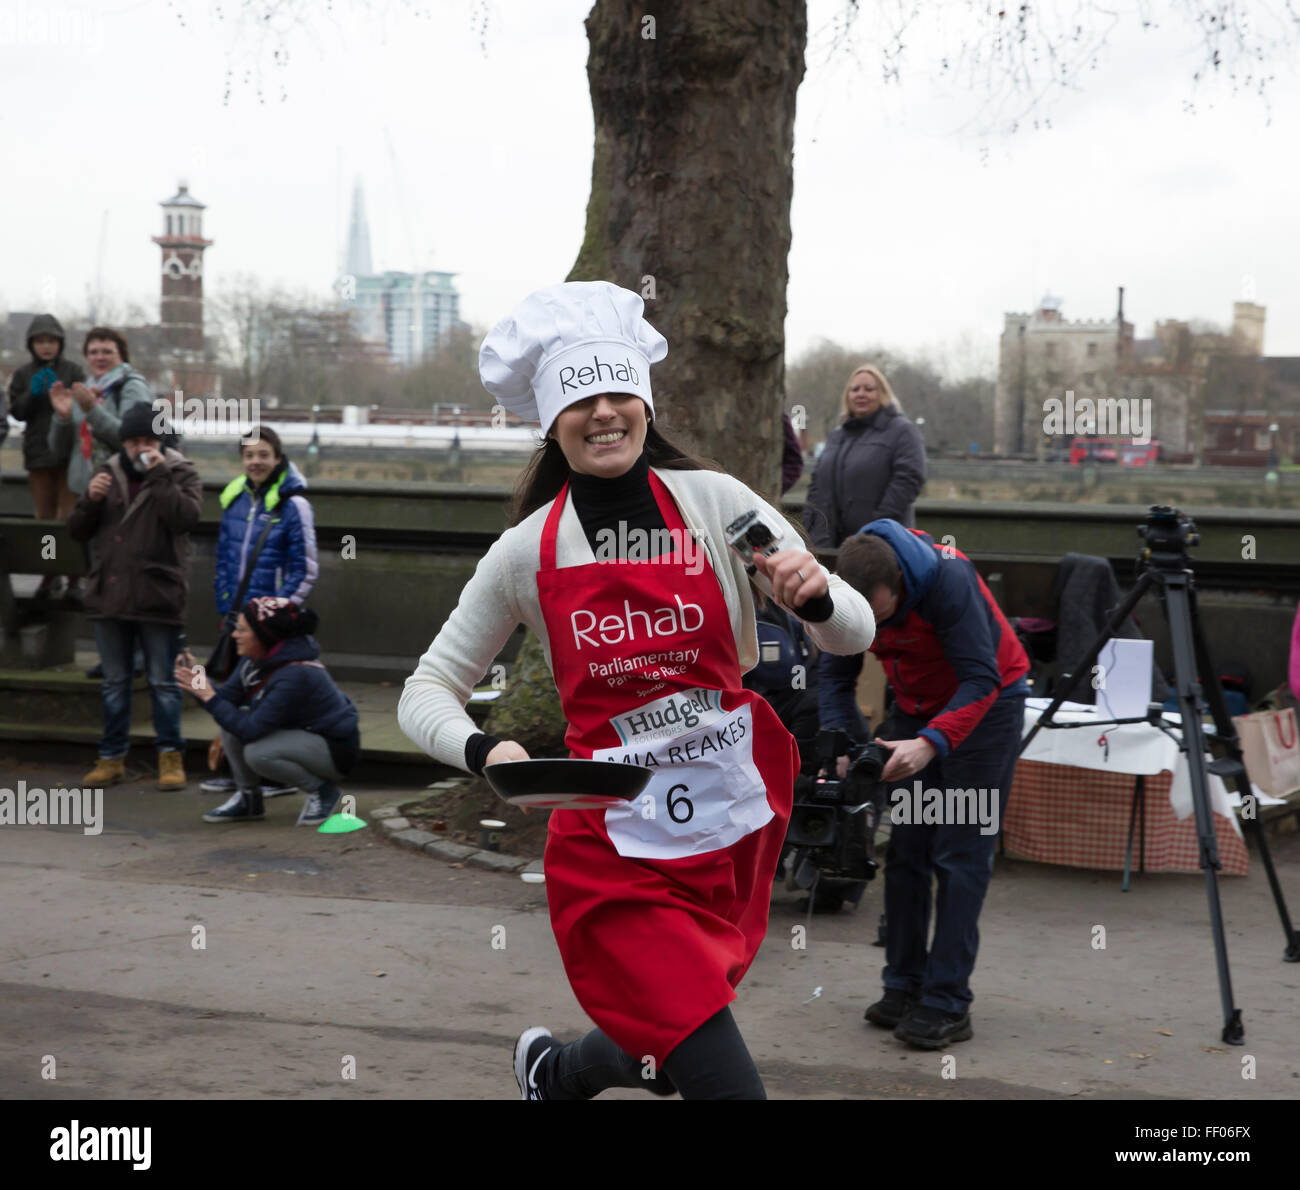 Westminster,UK,9th February 2016,Mia Reakes, runs at the Rehab Parliamentary Pancake Race 201 Credit: Keith Larby/Alamy Live News Stock Photo